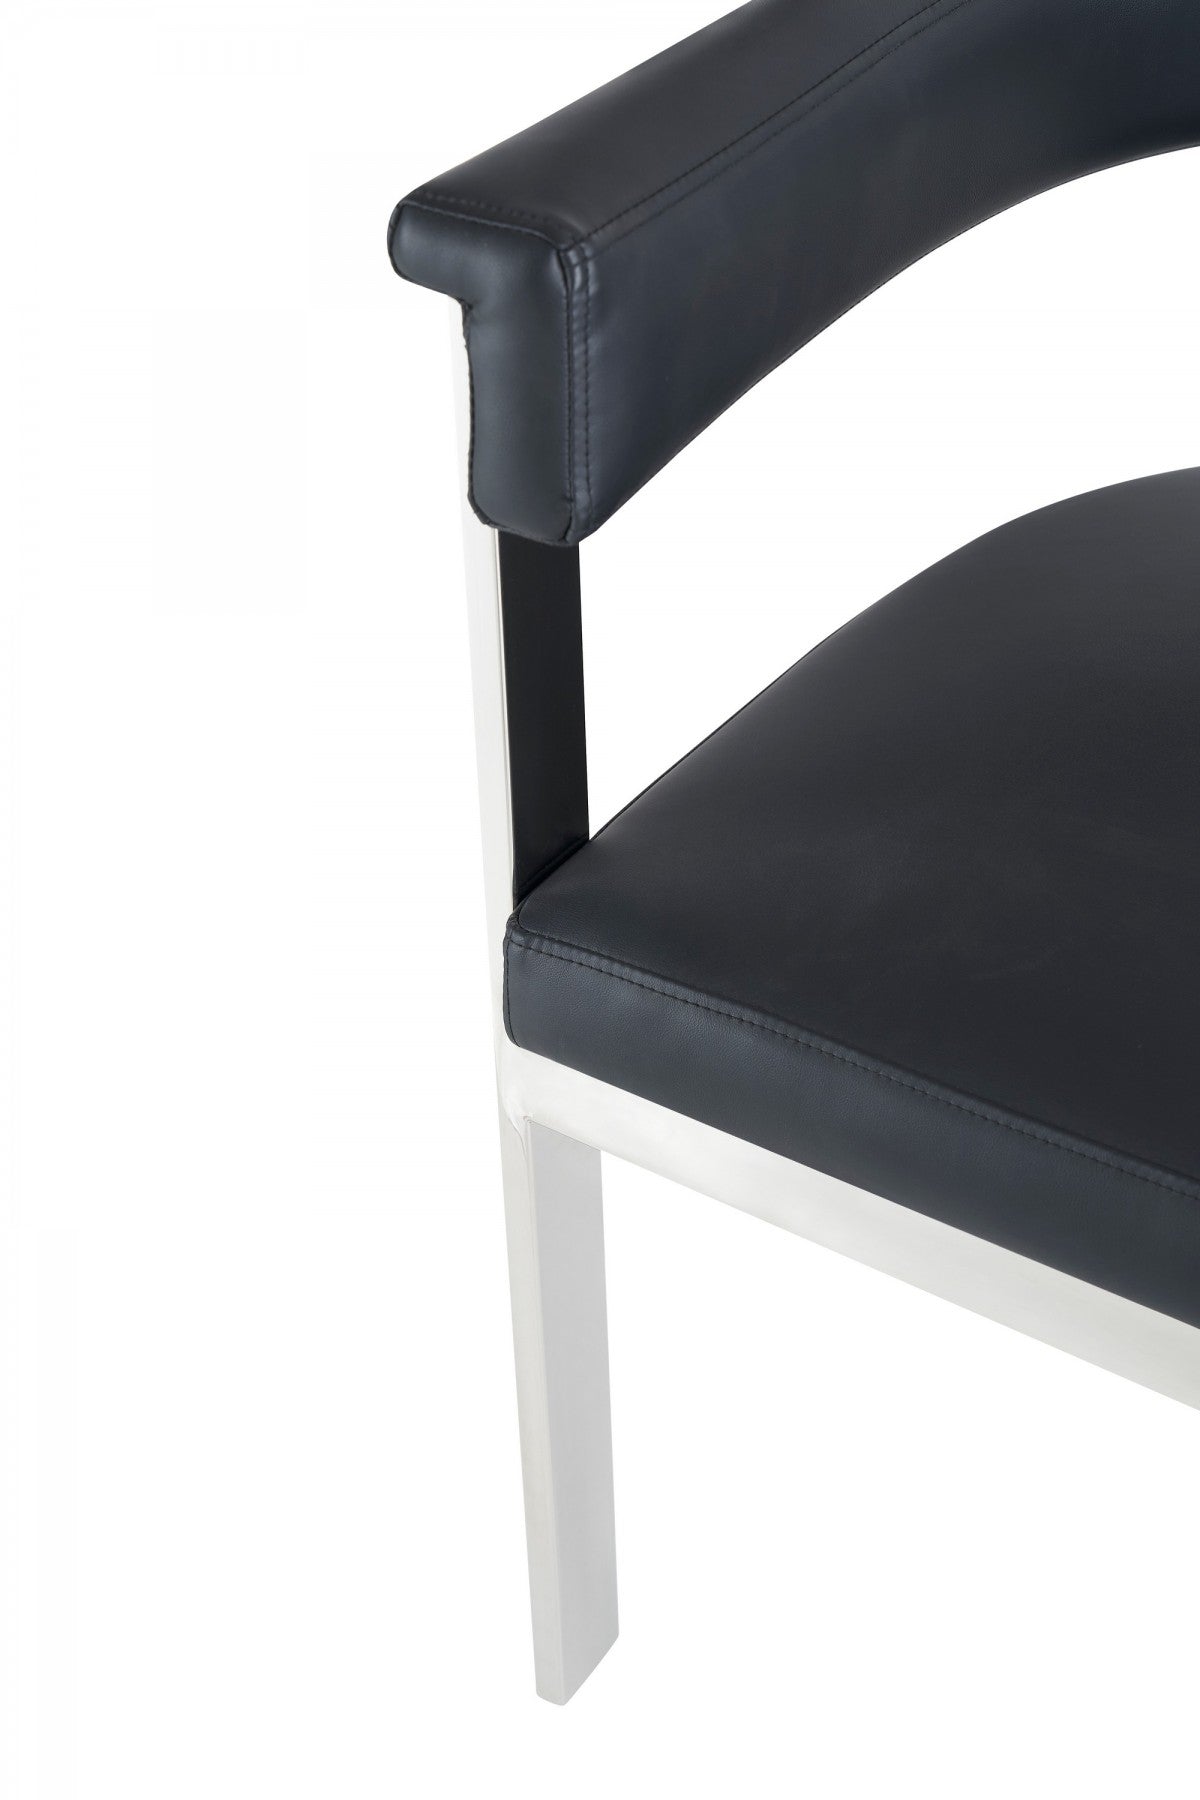 Modrest Pontiac - Modern Black Vegan Leather and Stainless Steel Dining Chair